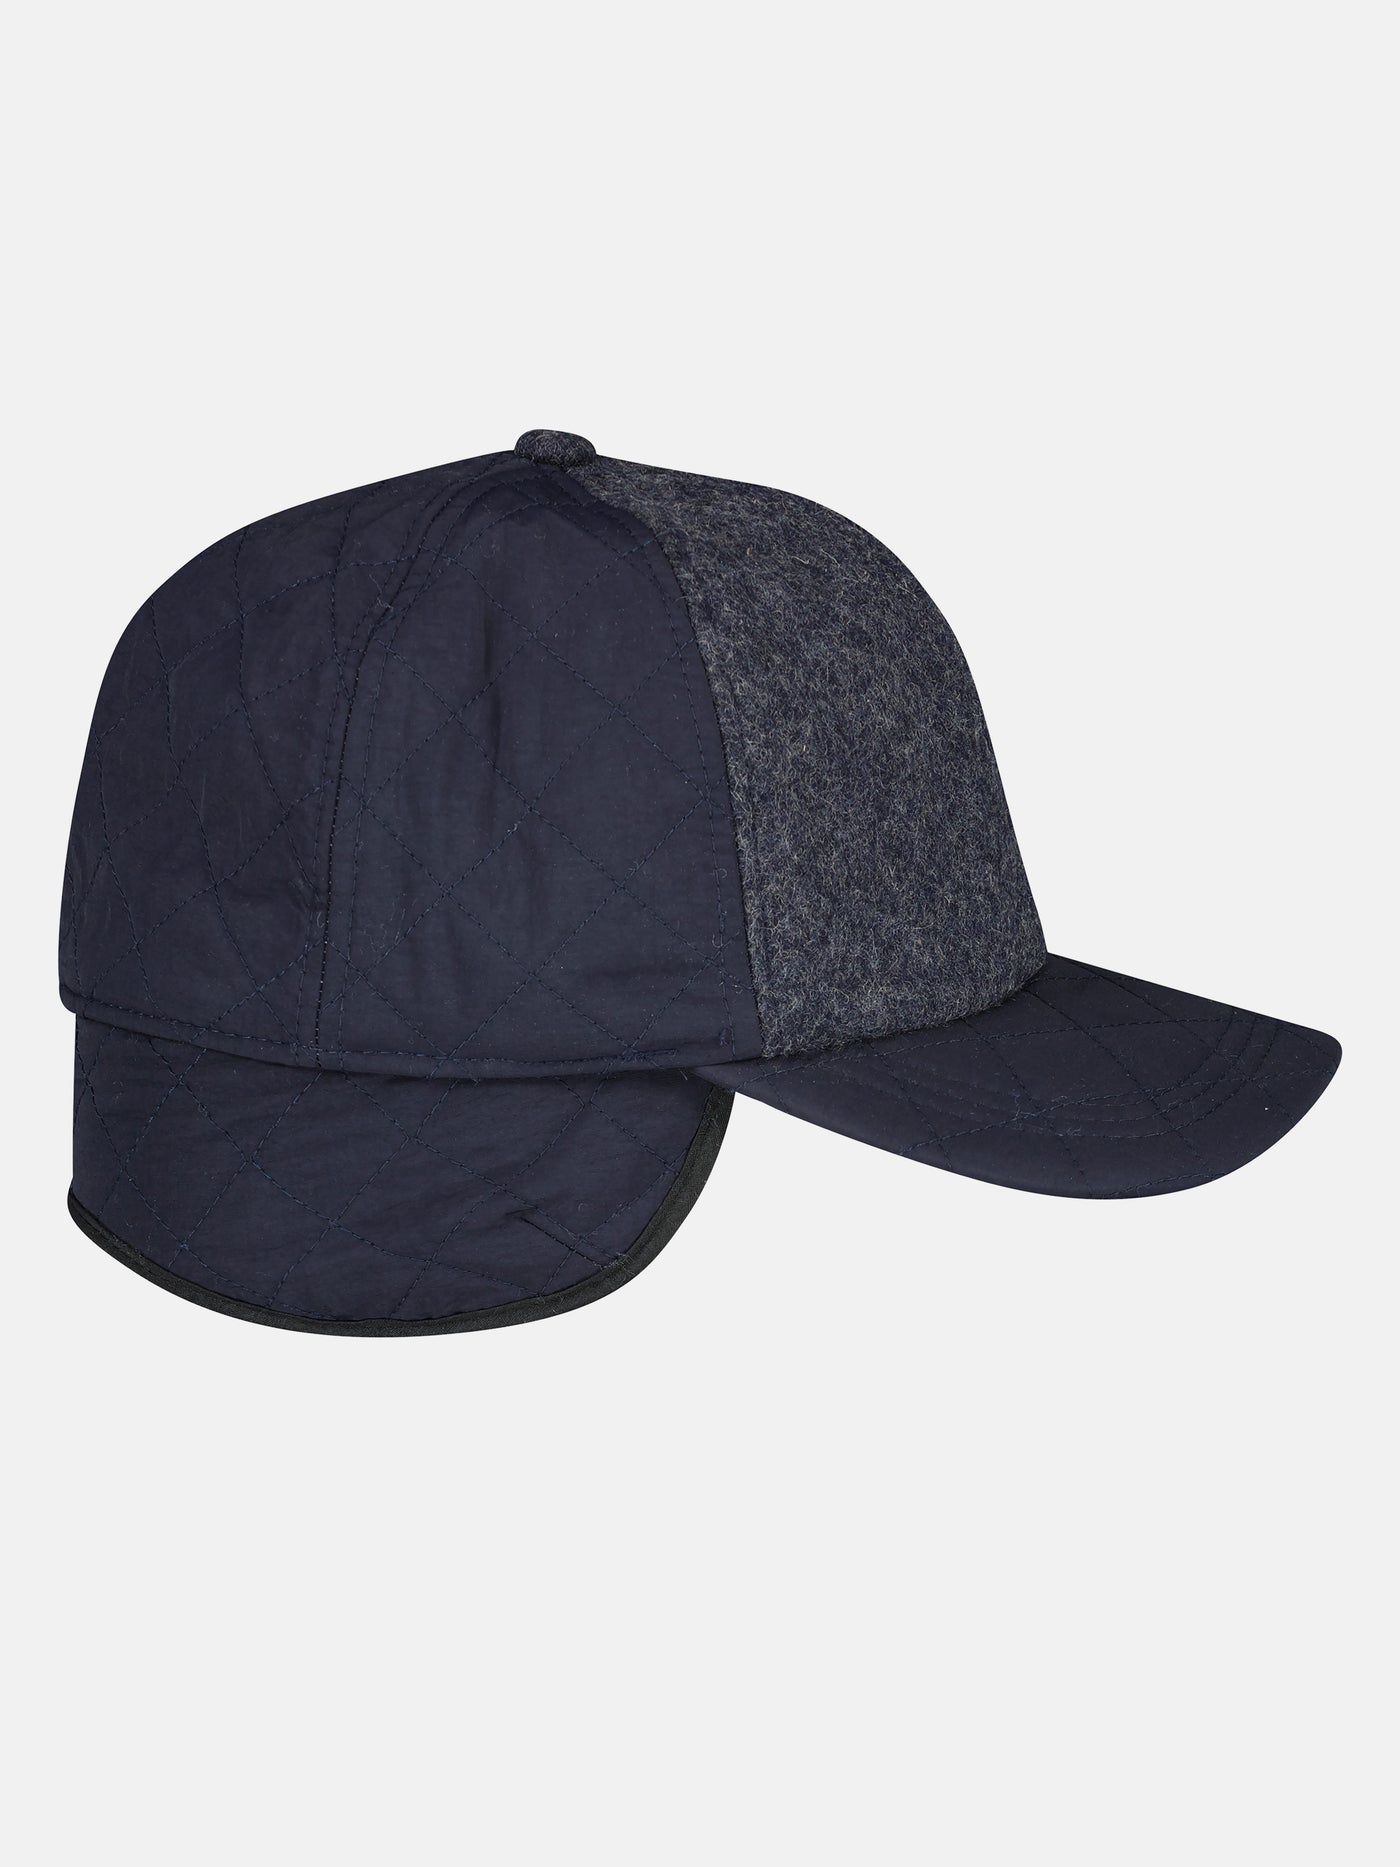 Lined baseball cap with earflaps